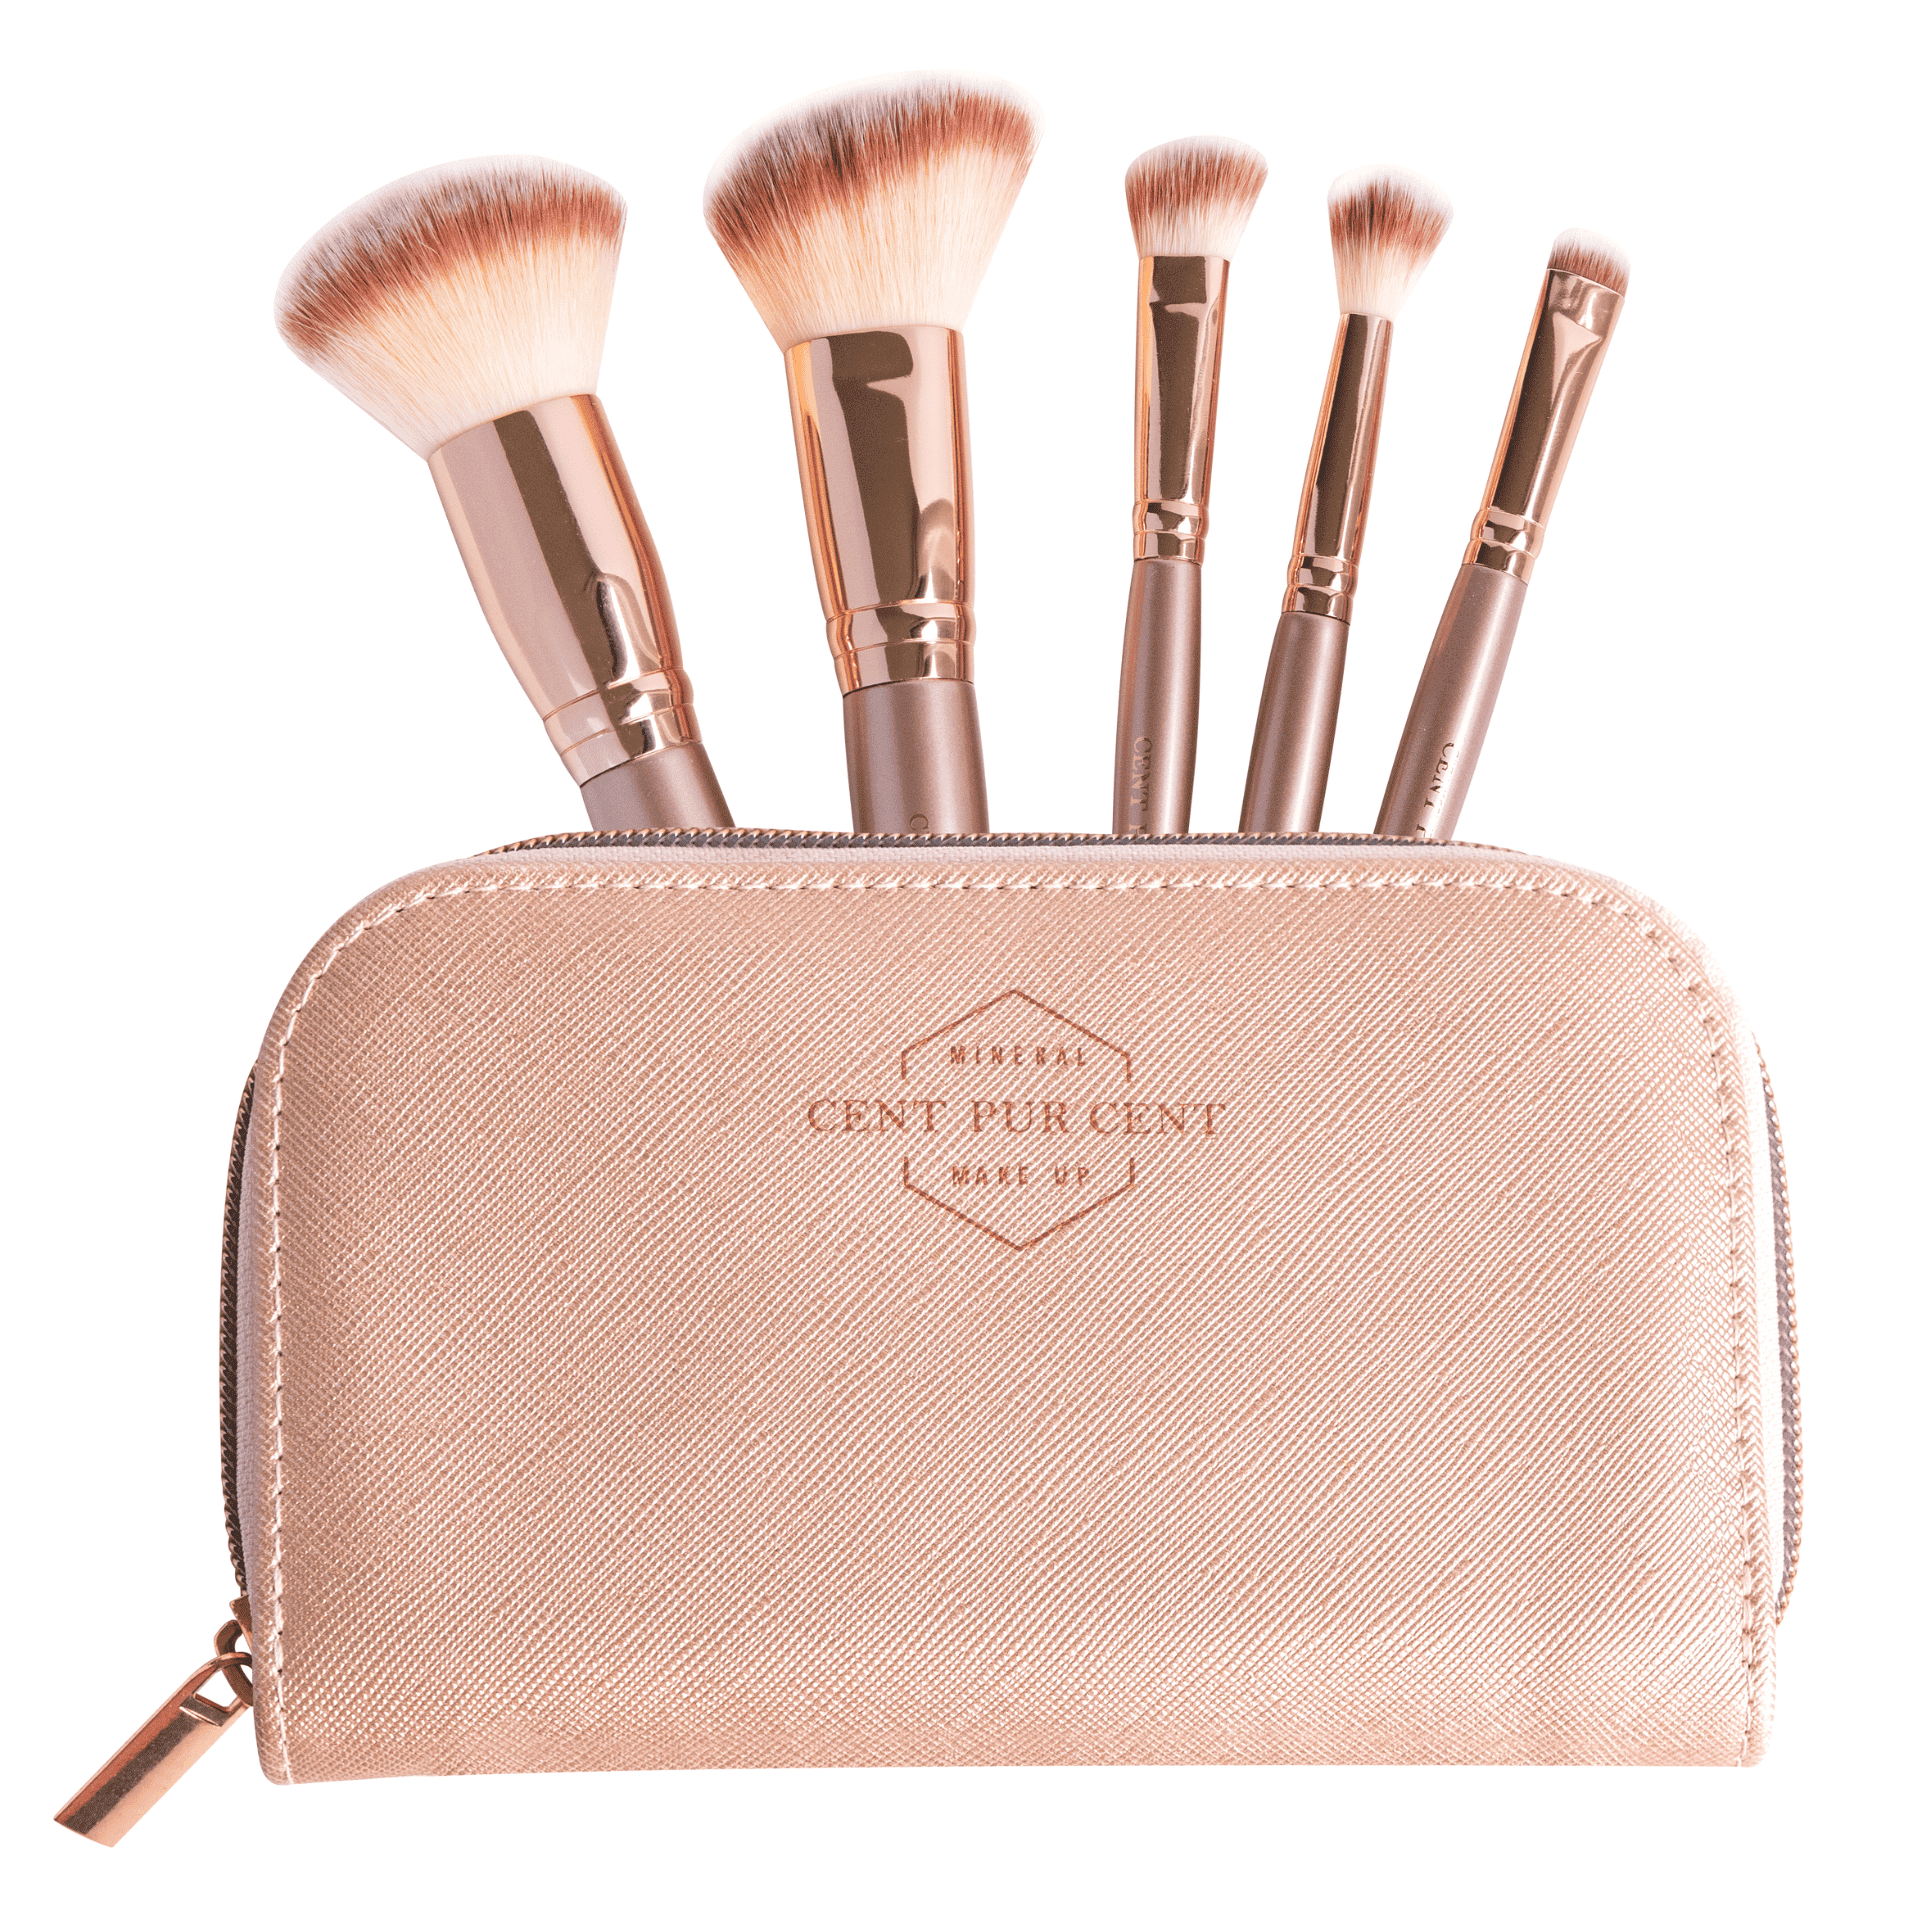 Cent Pur Cent Clutch Luxe Brush Set 5